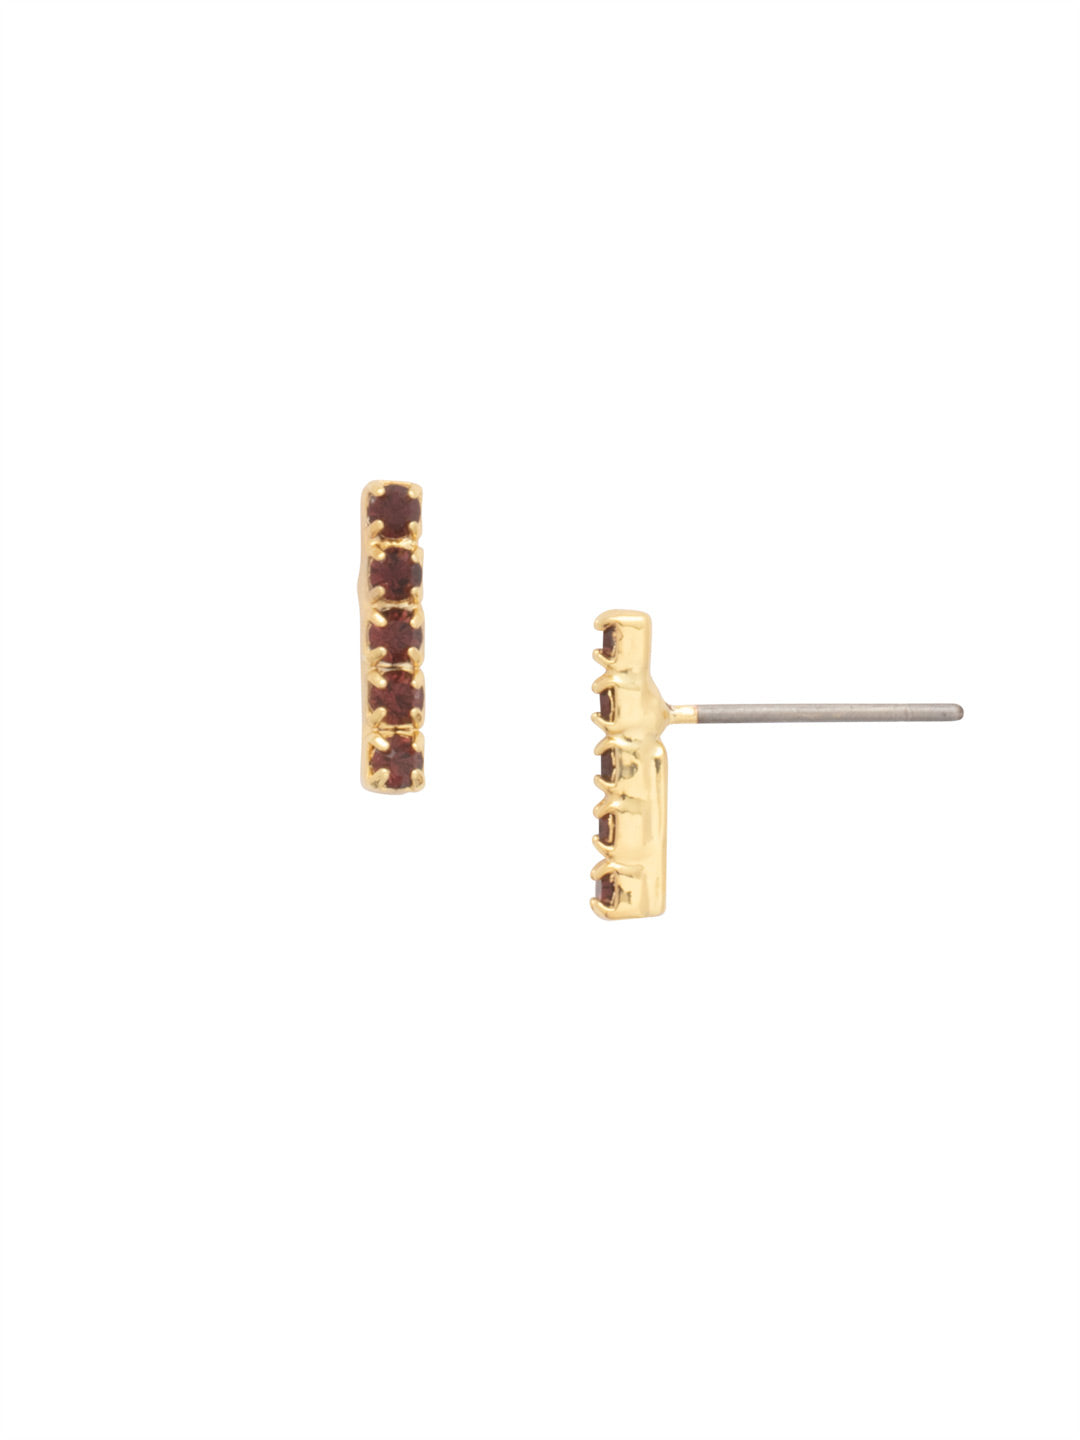 Raina Stud Earring - EDD1BGMRL - <p>Stacked just right! Five round crystals form a petite line in this modern post earring. From Sorrelli's Merlot collection in our Bright Gold-tone finish.</p>